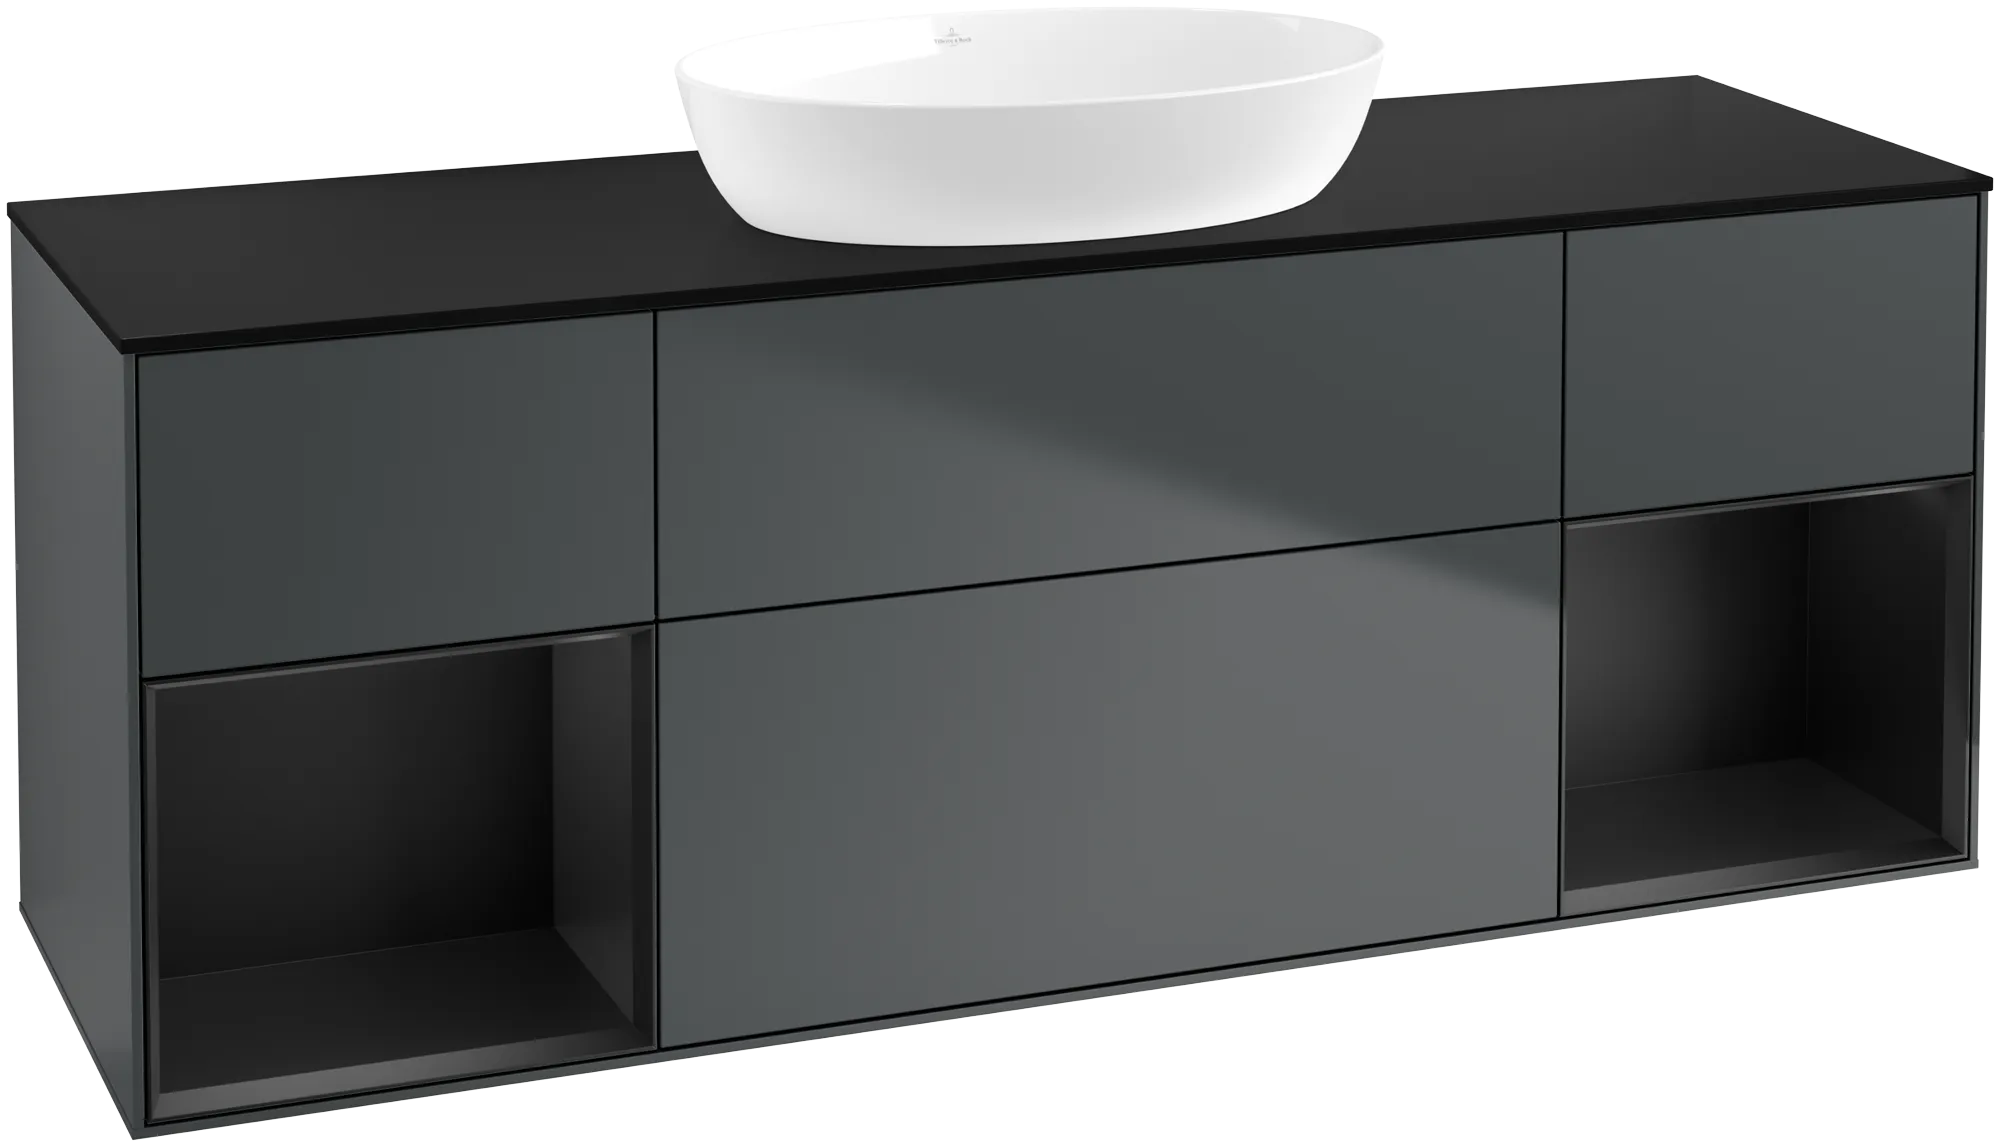 Picture of VILLEROY BOCH Finion Vanity unit, with lighting, 4 pull-out compartments, 1600 x 603 x 501 mm, Midnight Blue Matt Lacquer / Black Matt Lacquer / Glass Black Matt #FD02PDHG